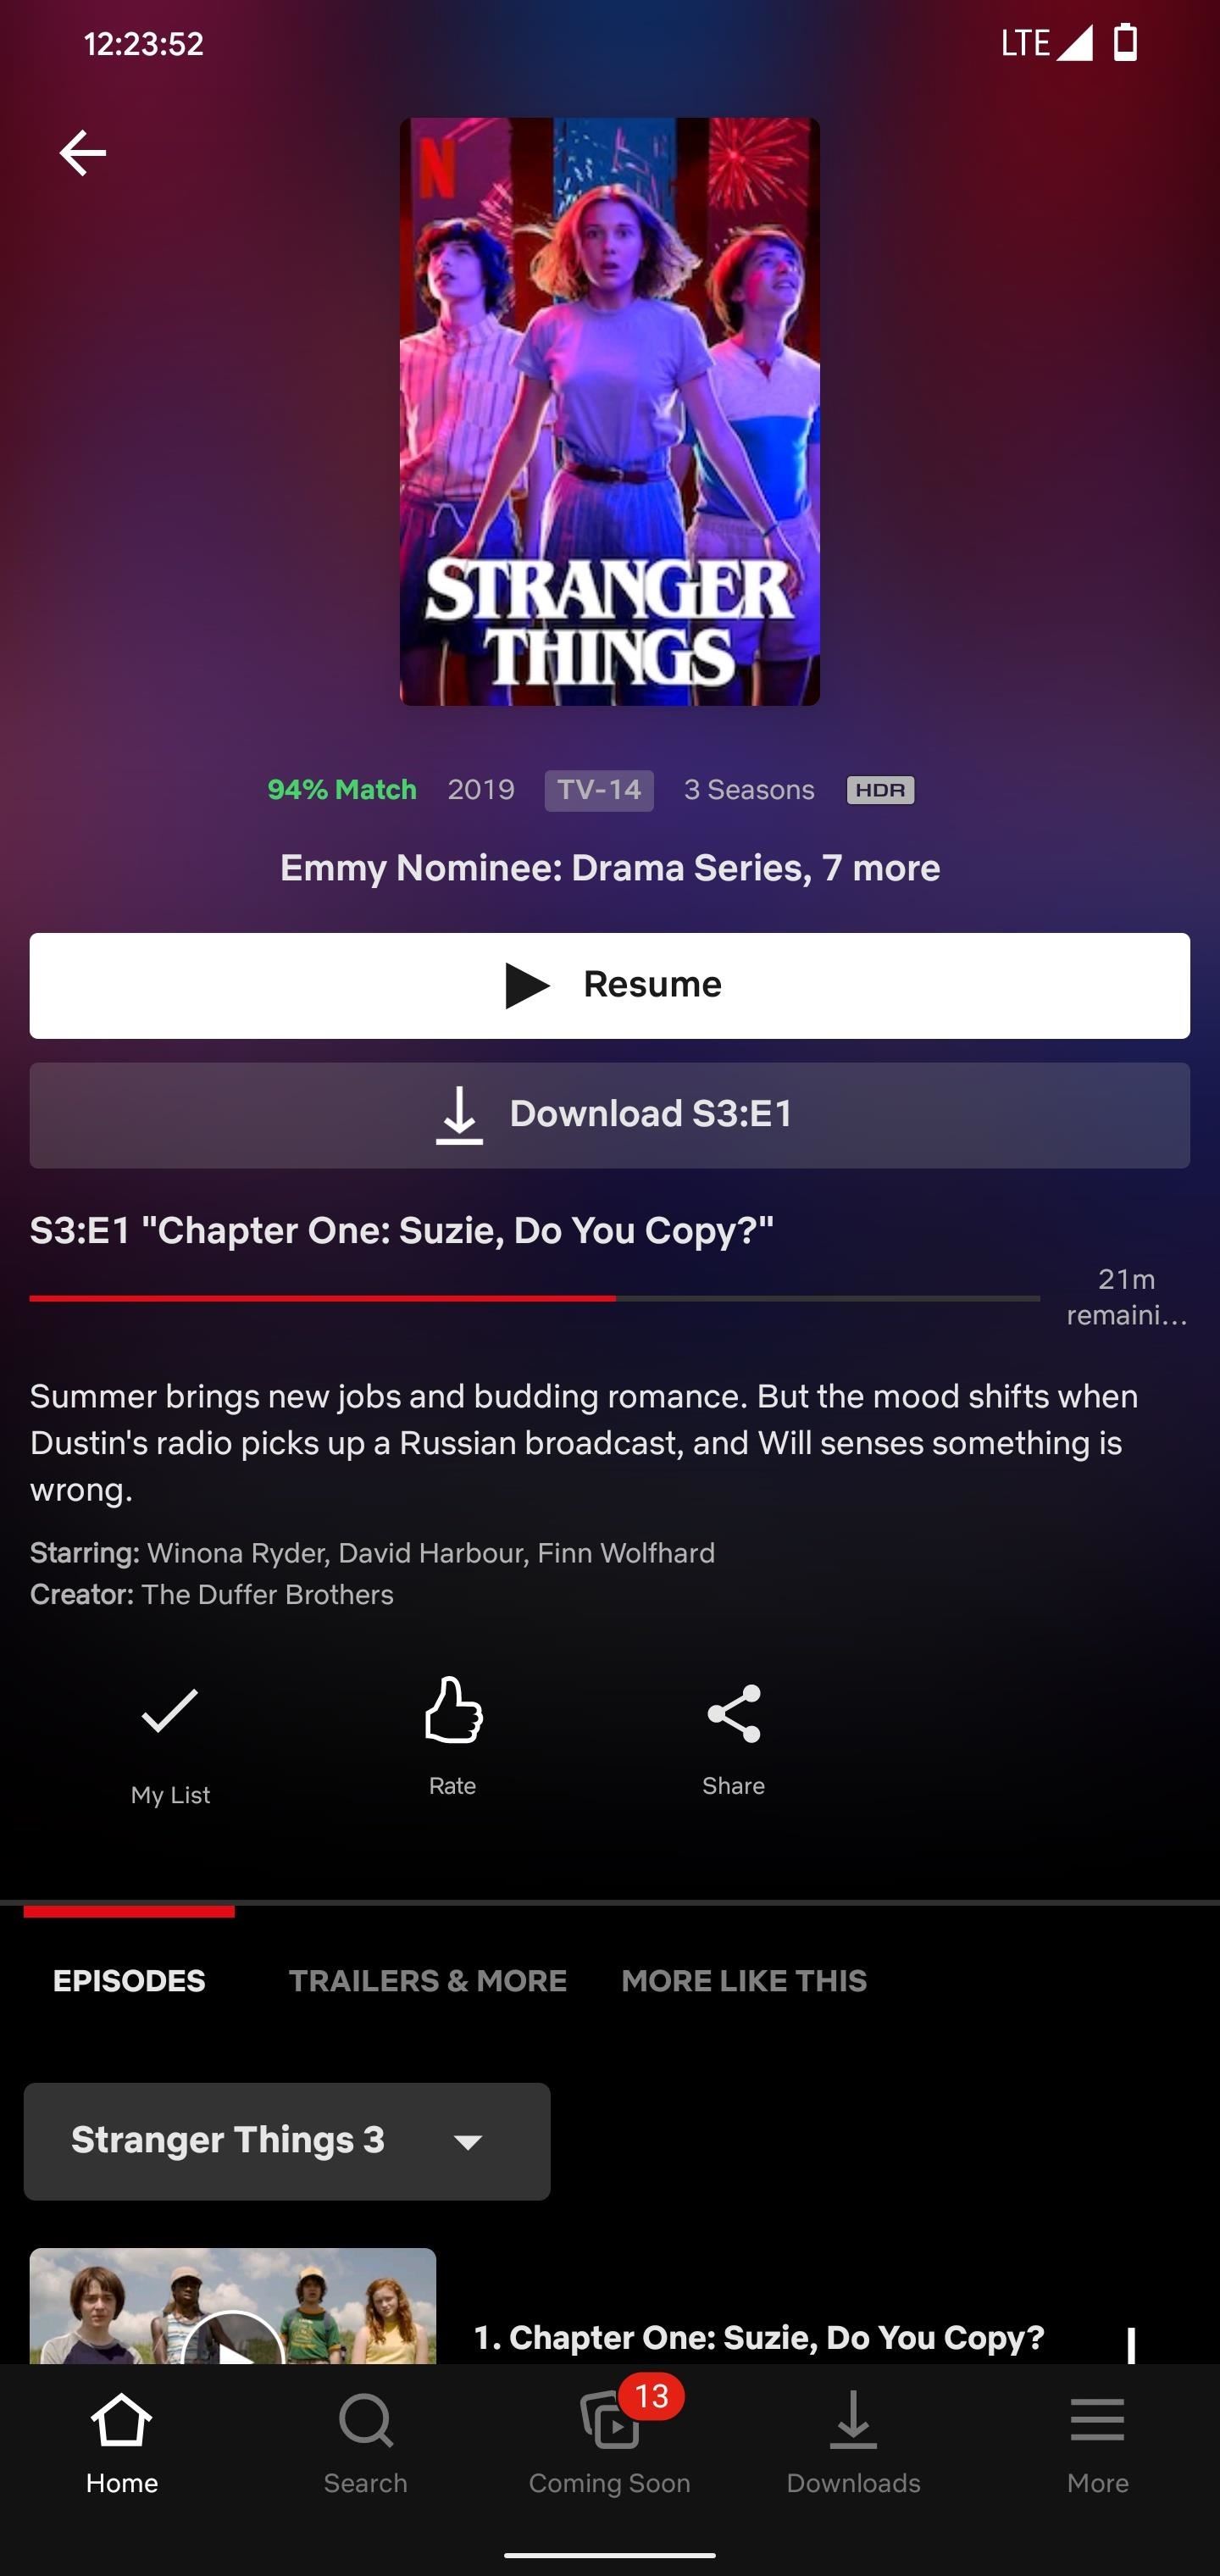 Netflix Caps Video Quality Based on Your Phone's Widevine DRM Level — Here's How to Check for HDR & FHD Support